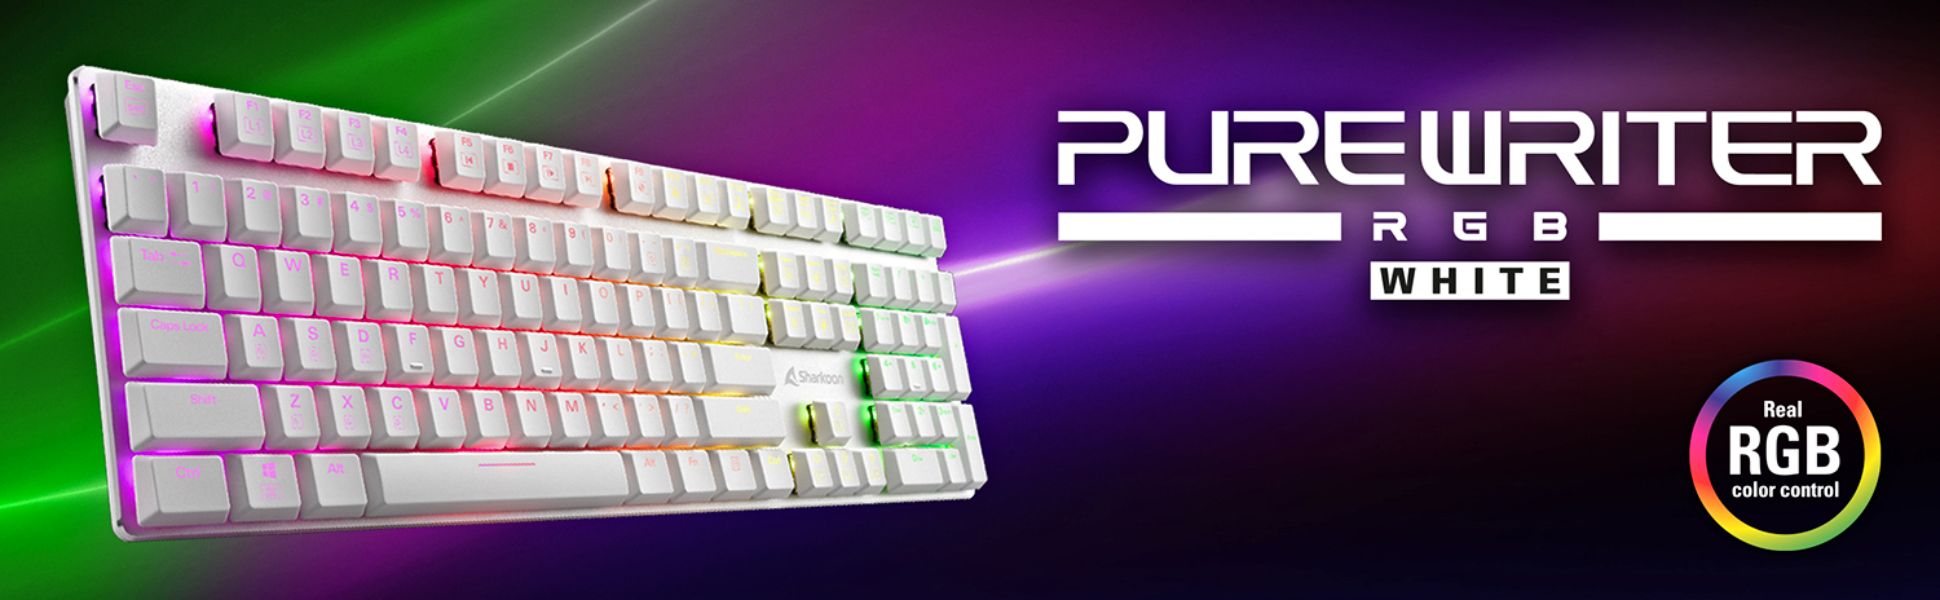 Sharkoon PureWriter RGB en colores White and Black